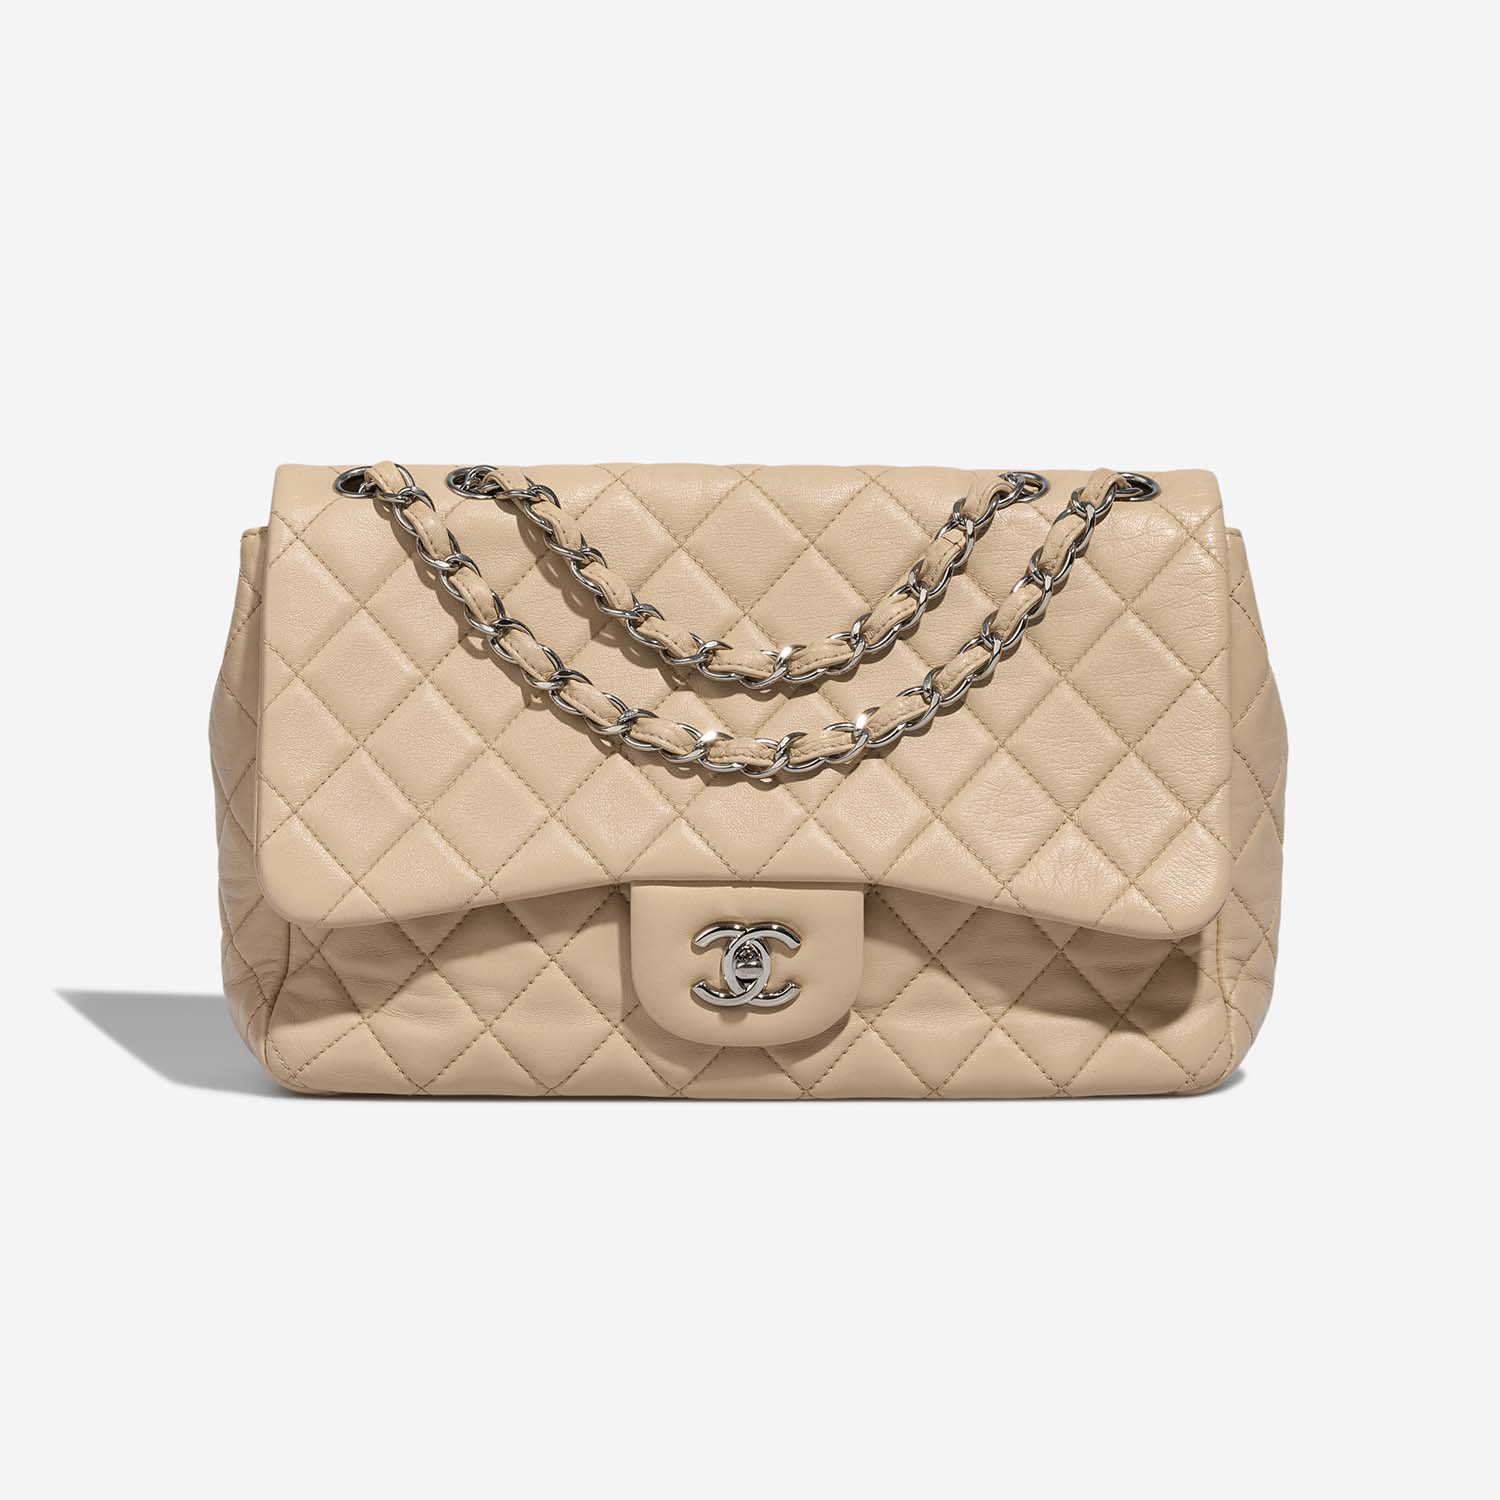 Chanel Beige Leather Micro Classic Flap Belt Bag Chanel | The Luxury Closet